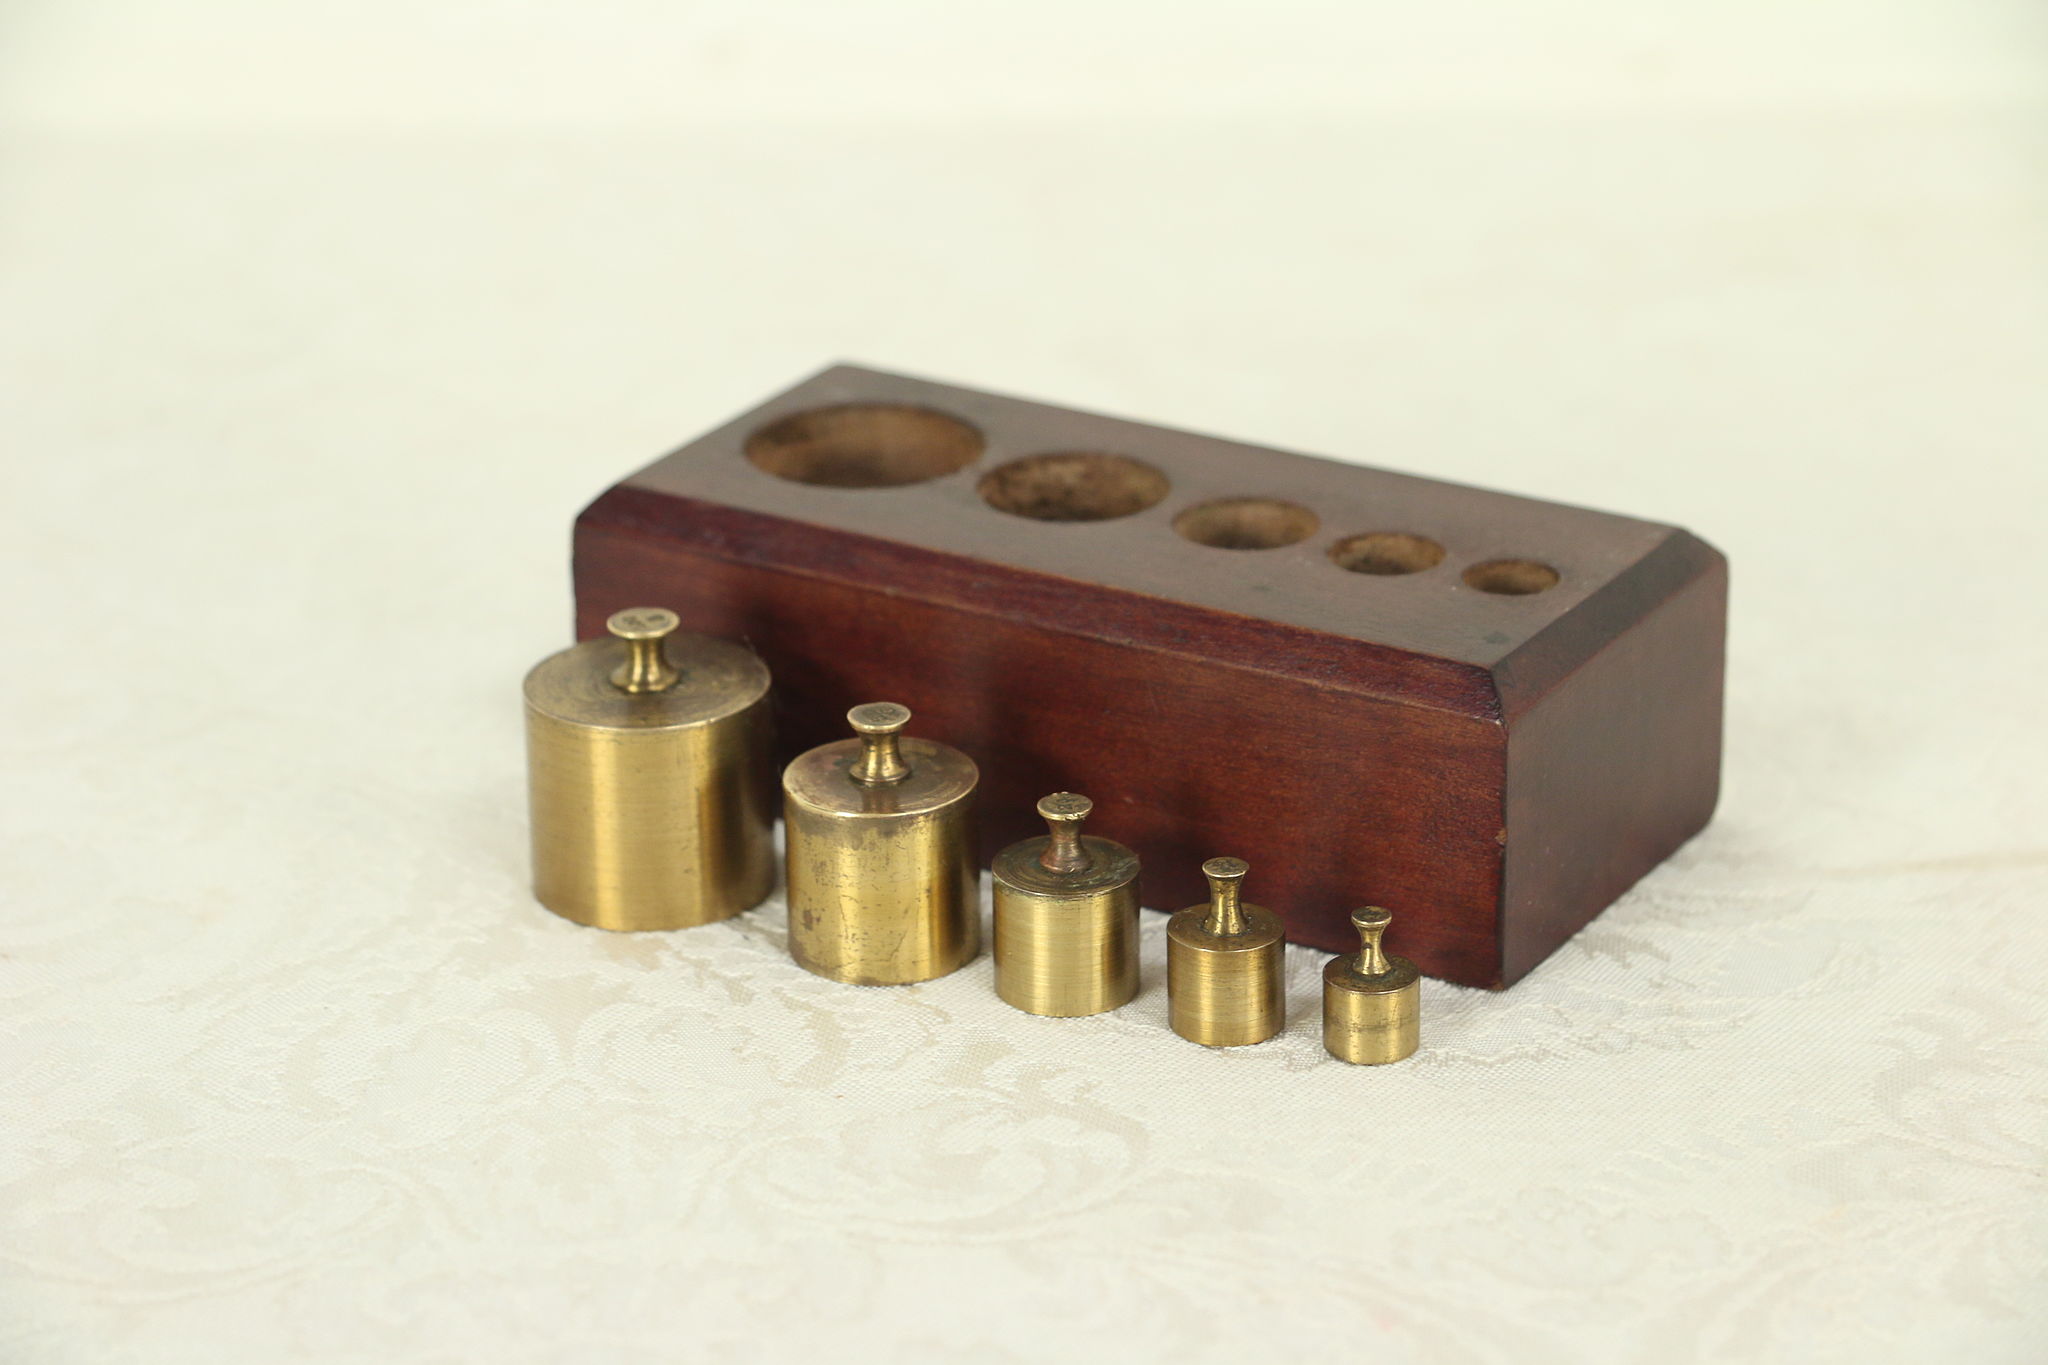 Set of 5 Antique Brass Scale Weight Set, 5-100 Grams, Case